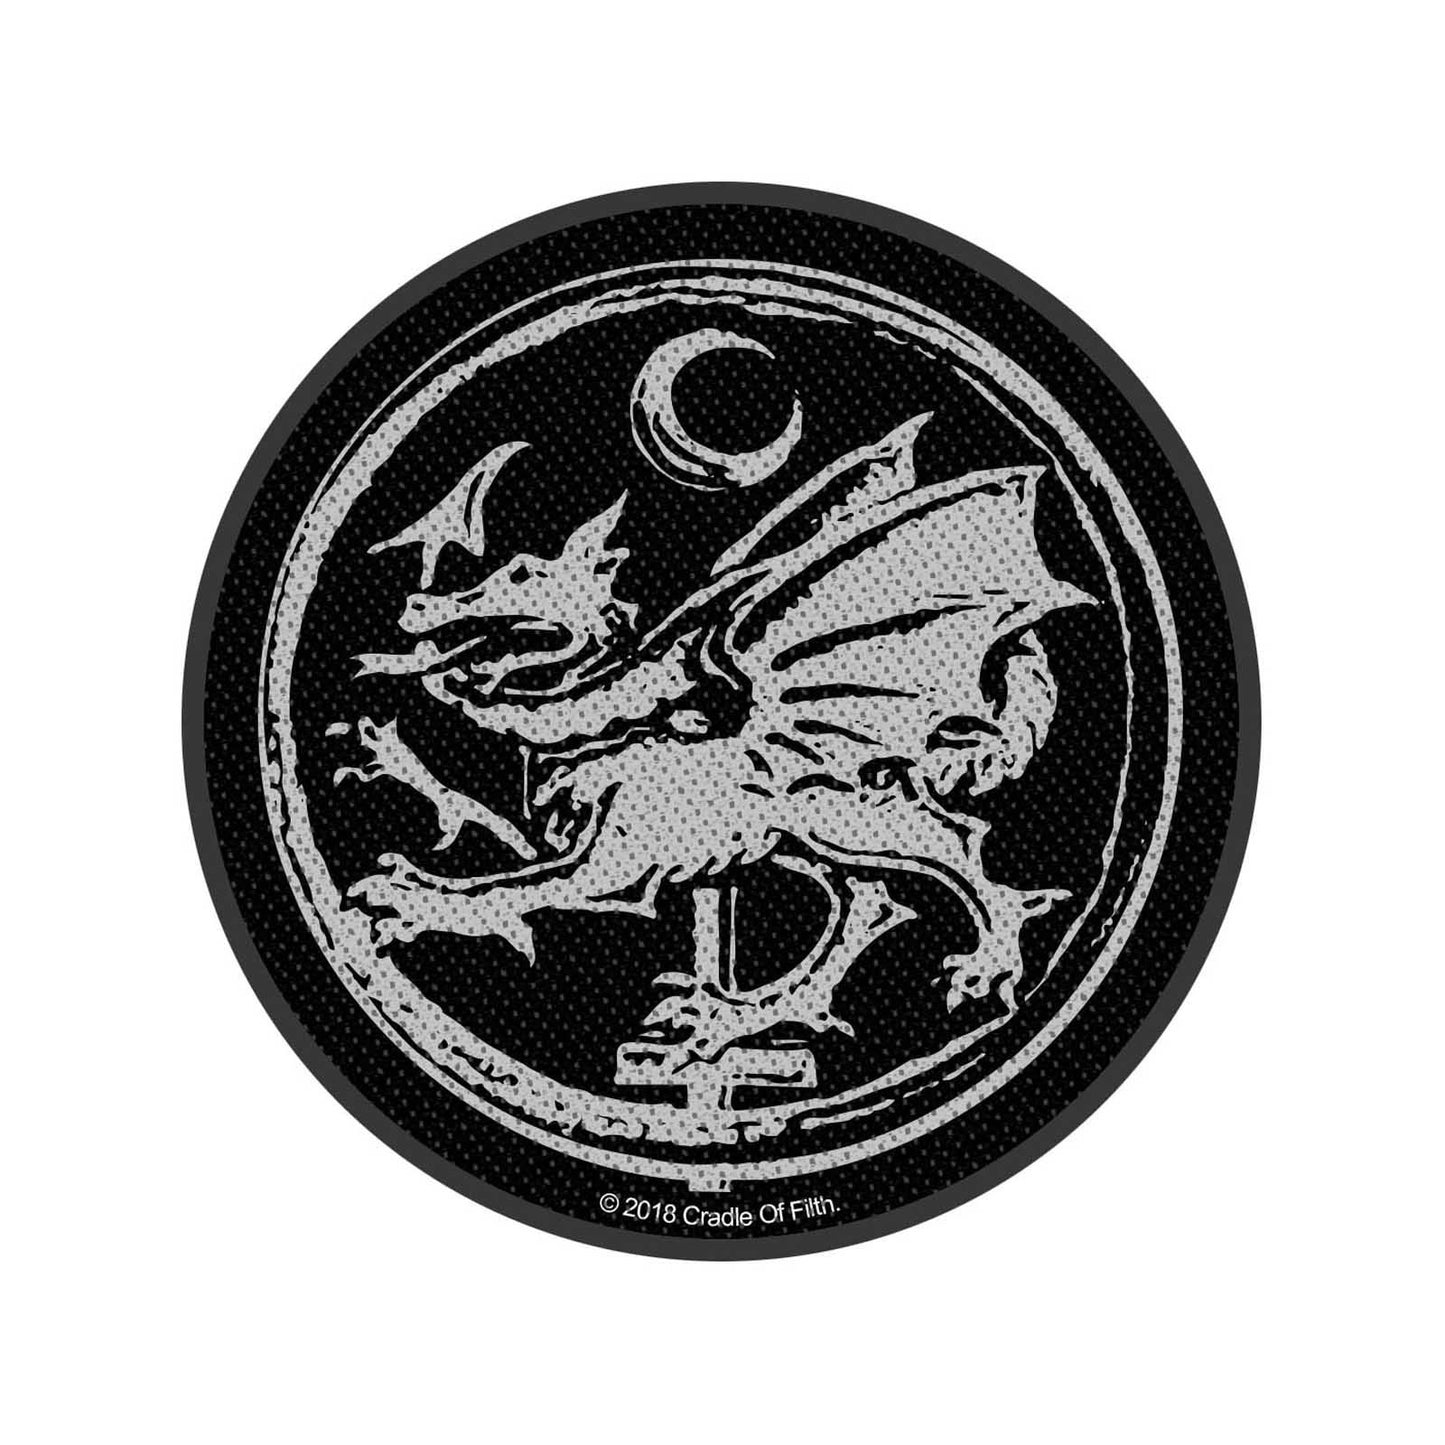 CRADLE OF FILTH STANDARD PATCH: ORDER OF THE DRAGON